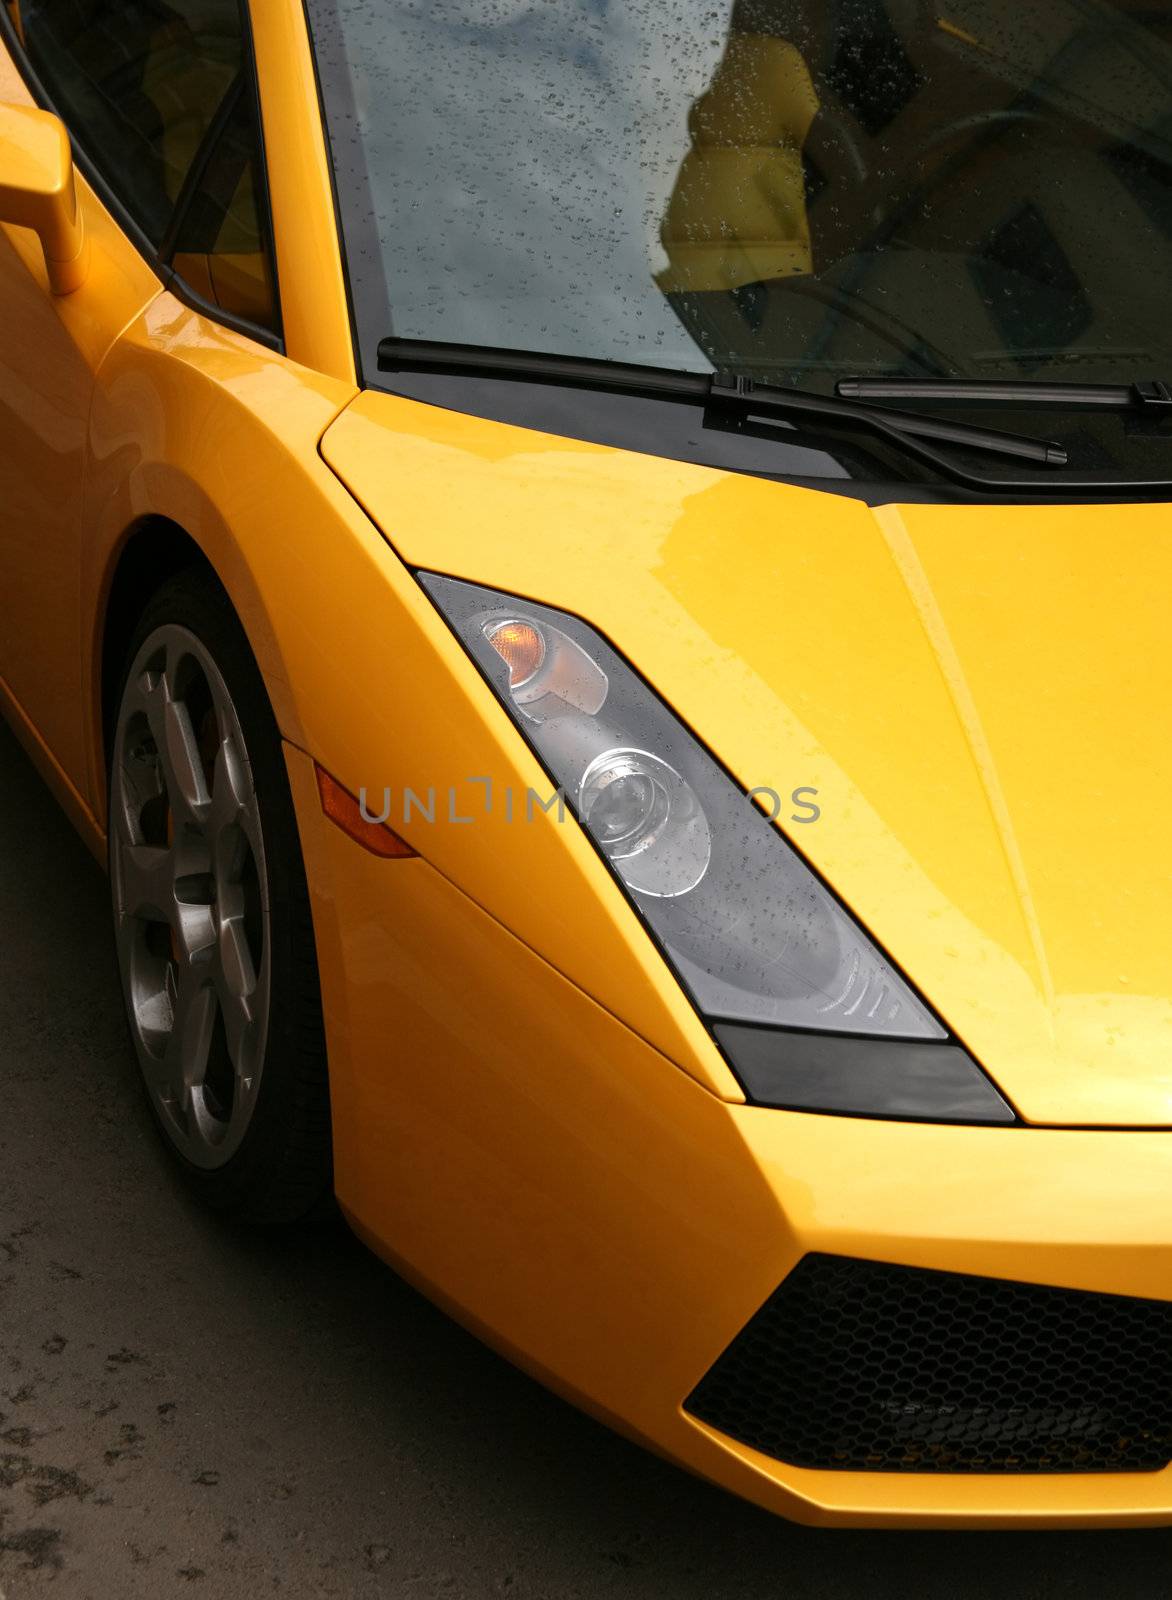 Detail of the magnificent yellow automobile